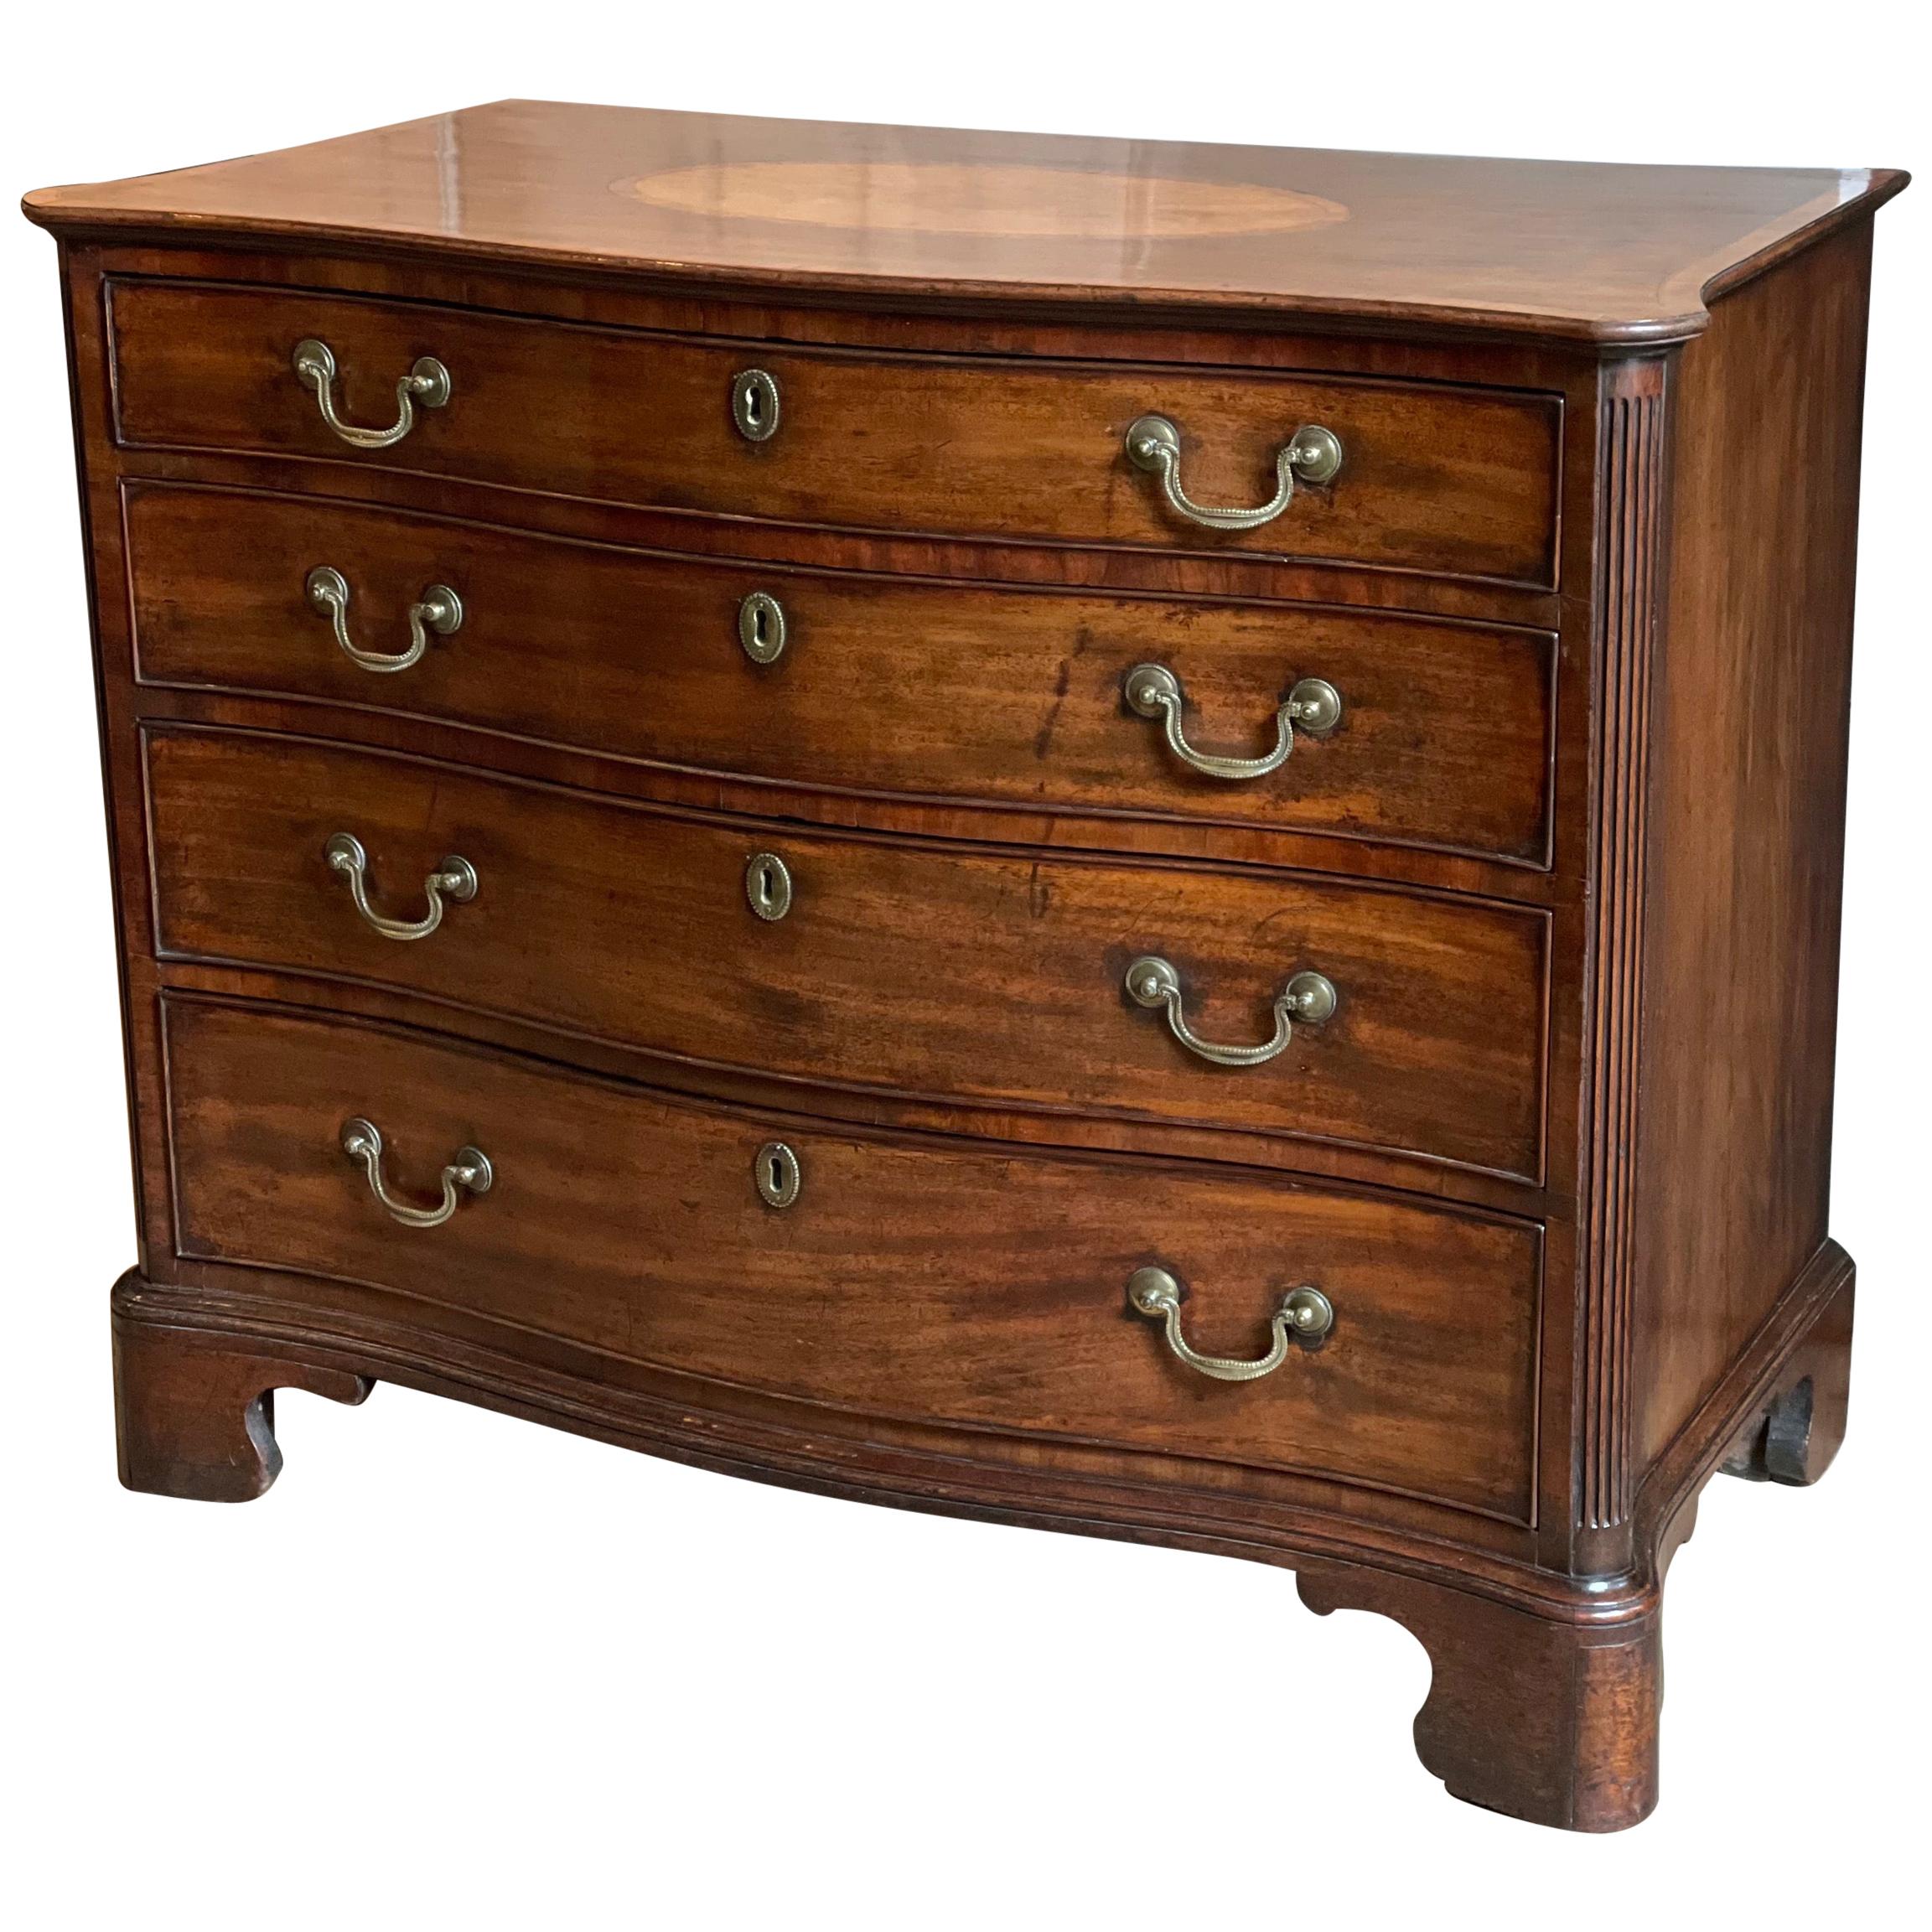 Chippendale Satinwood & Tulipwood Inlaid Mahogany Serpentine Chest of Drawers